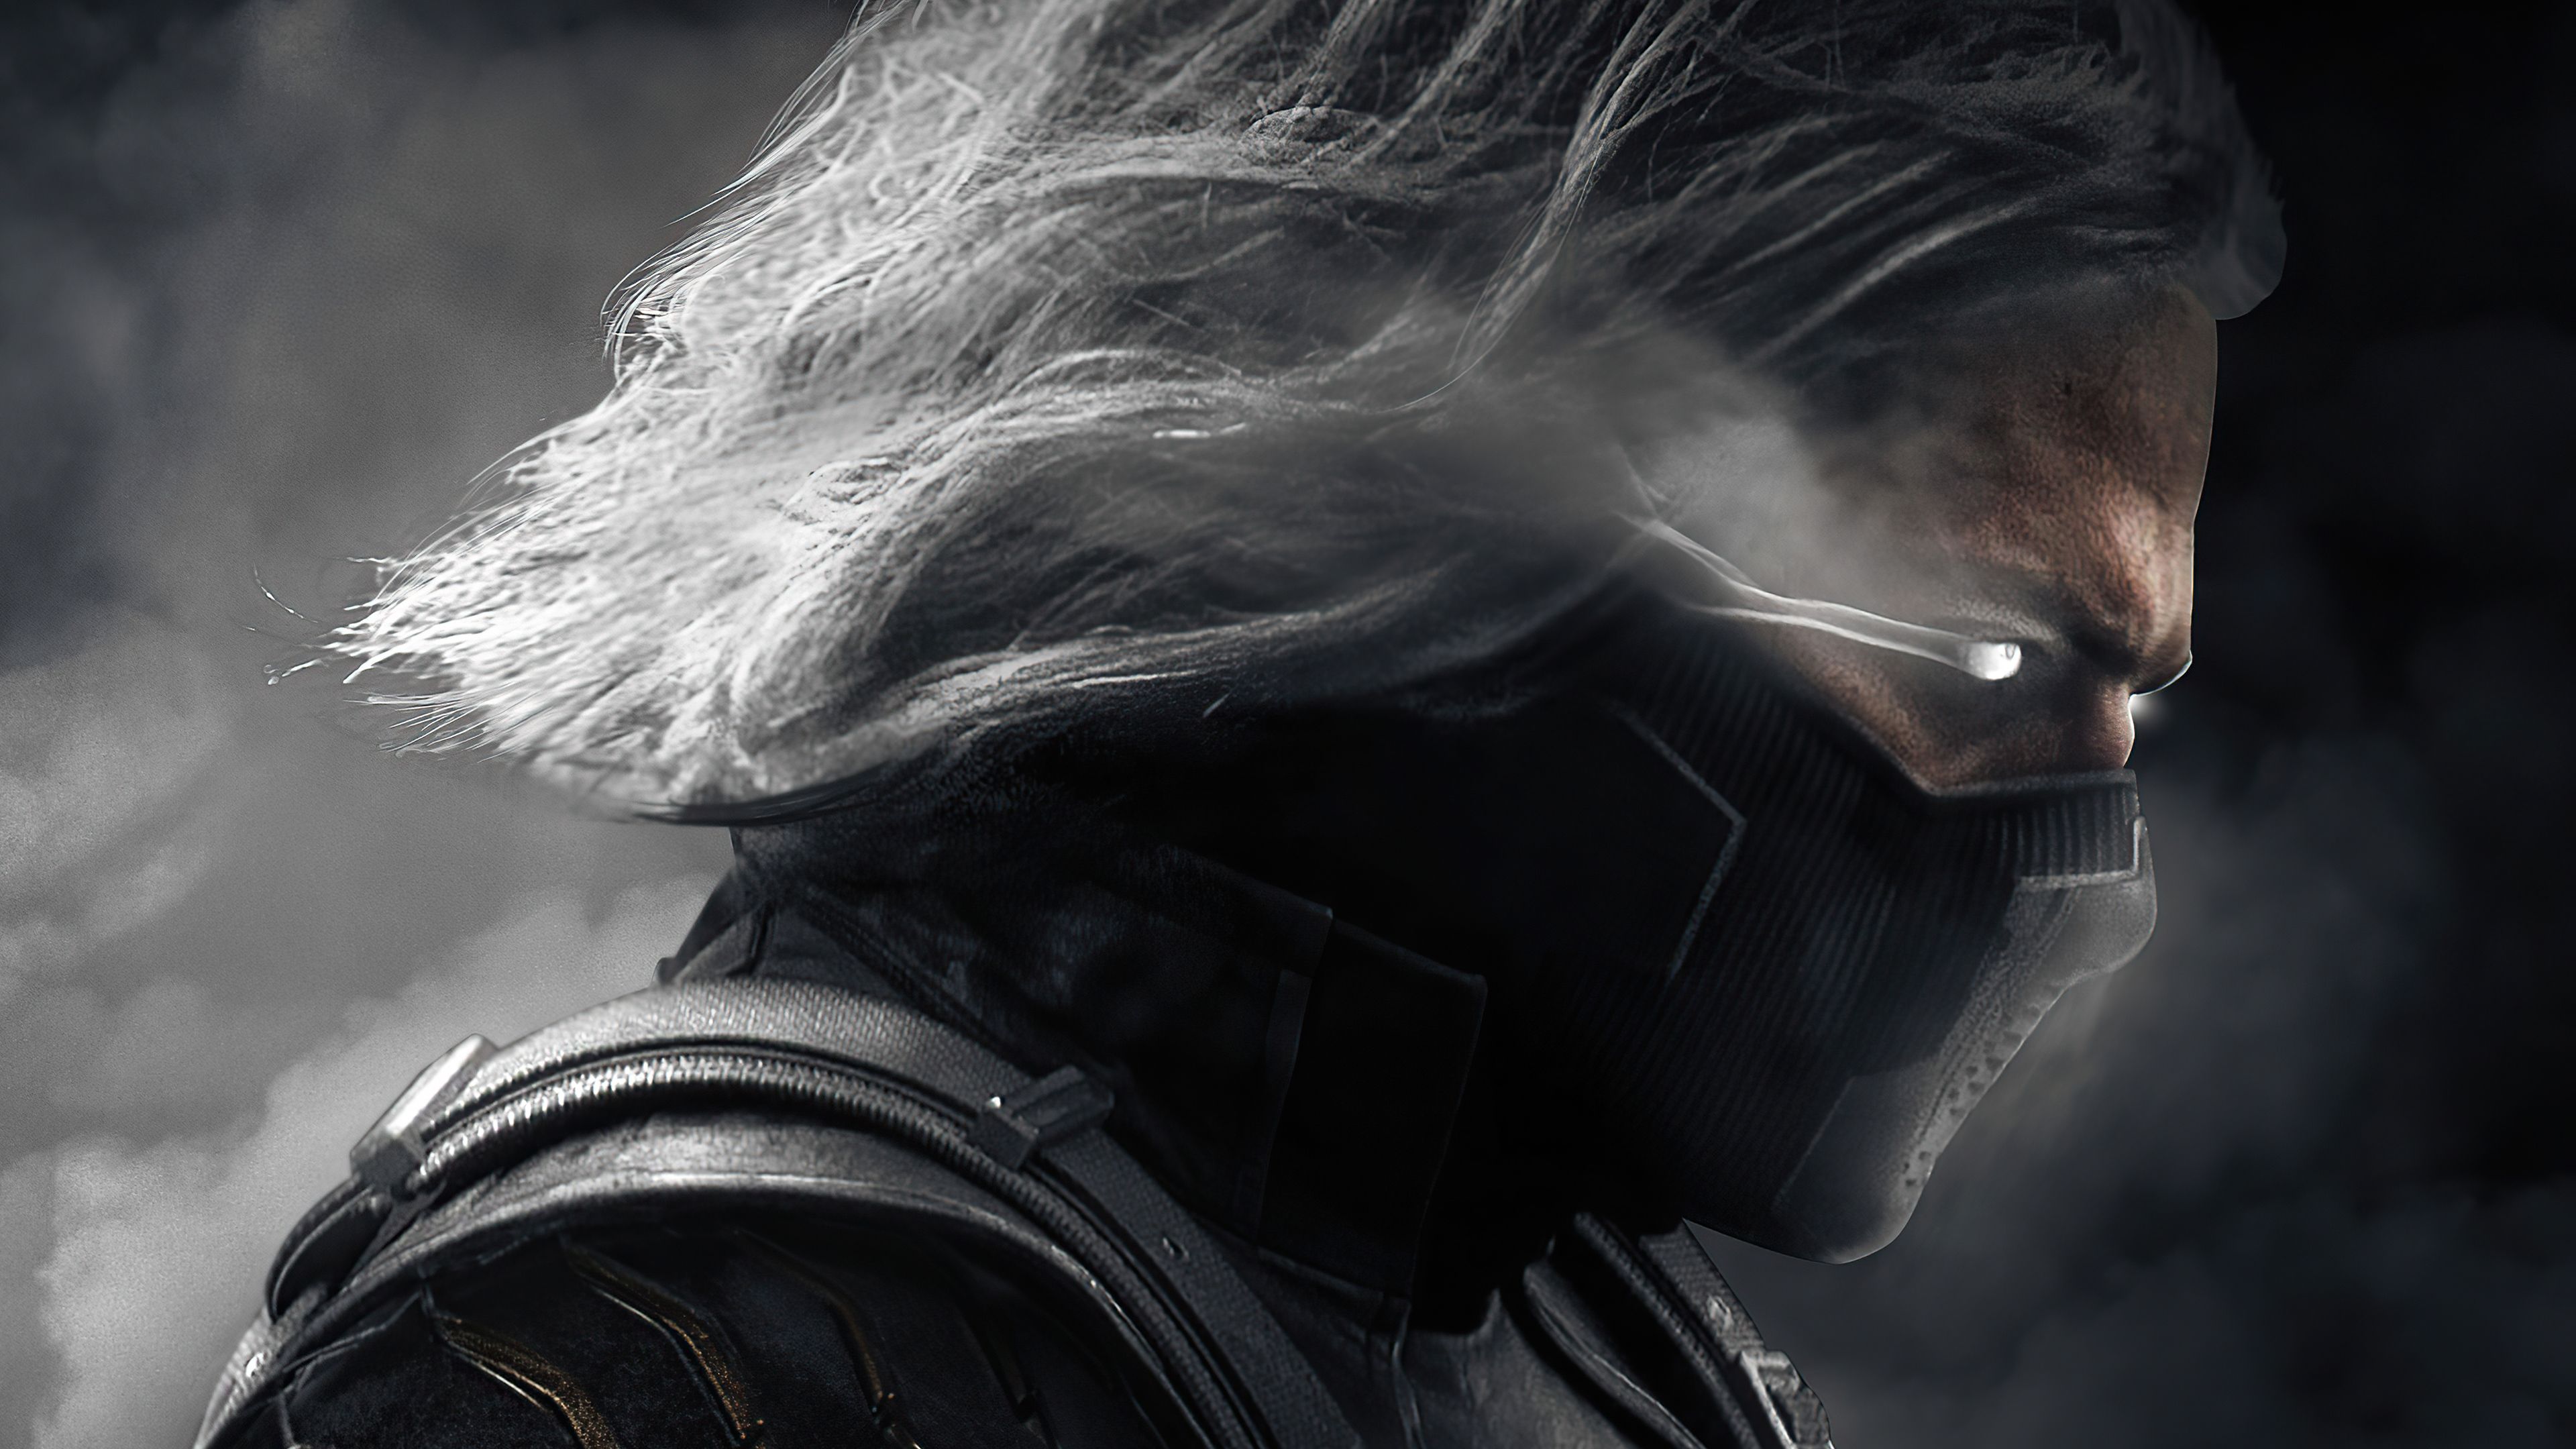 Smoke X Winter Soldier Mortal Kombat 1280x1024 Resolution HD 4k Wallpaper, Image, Background, Photo and Picture